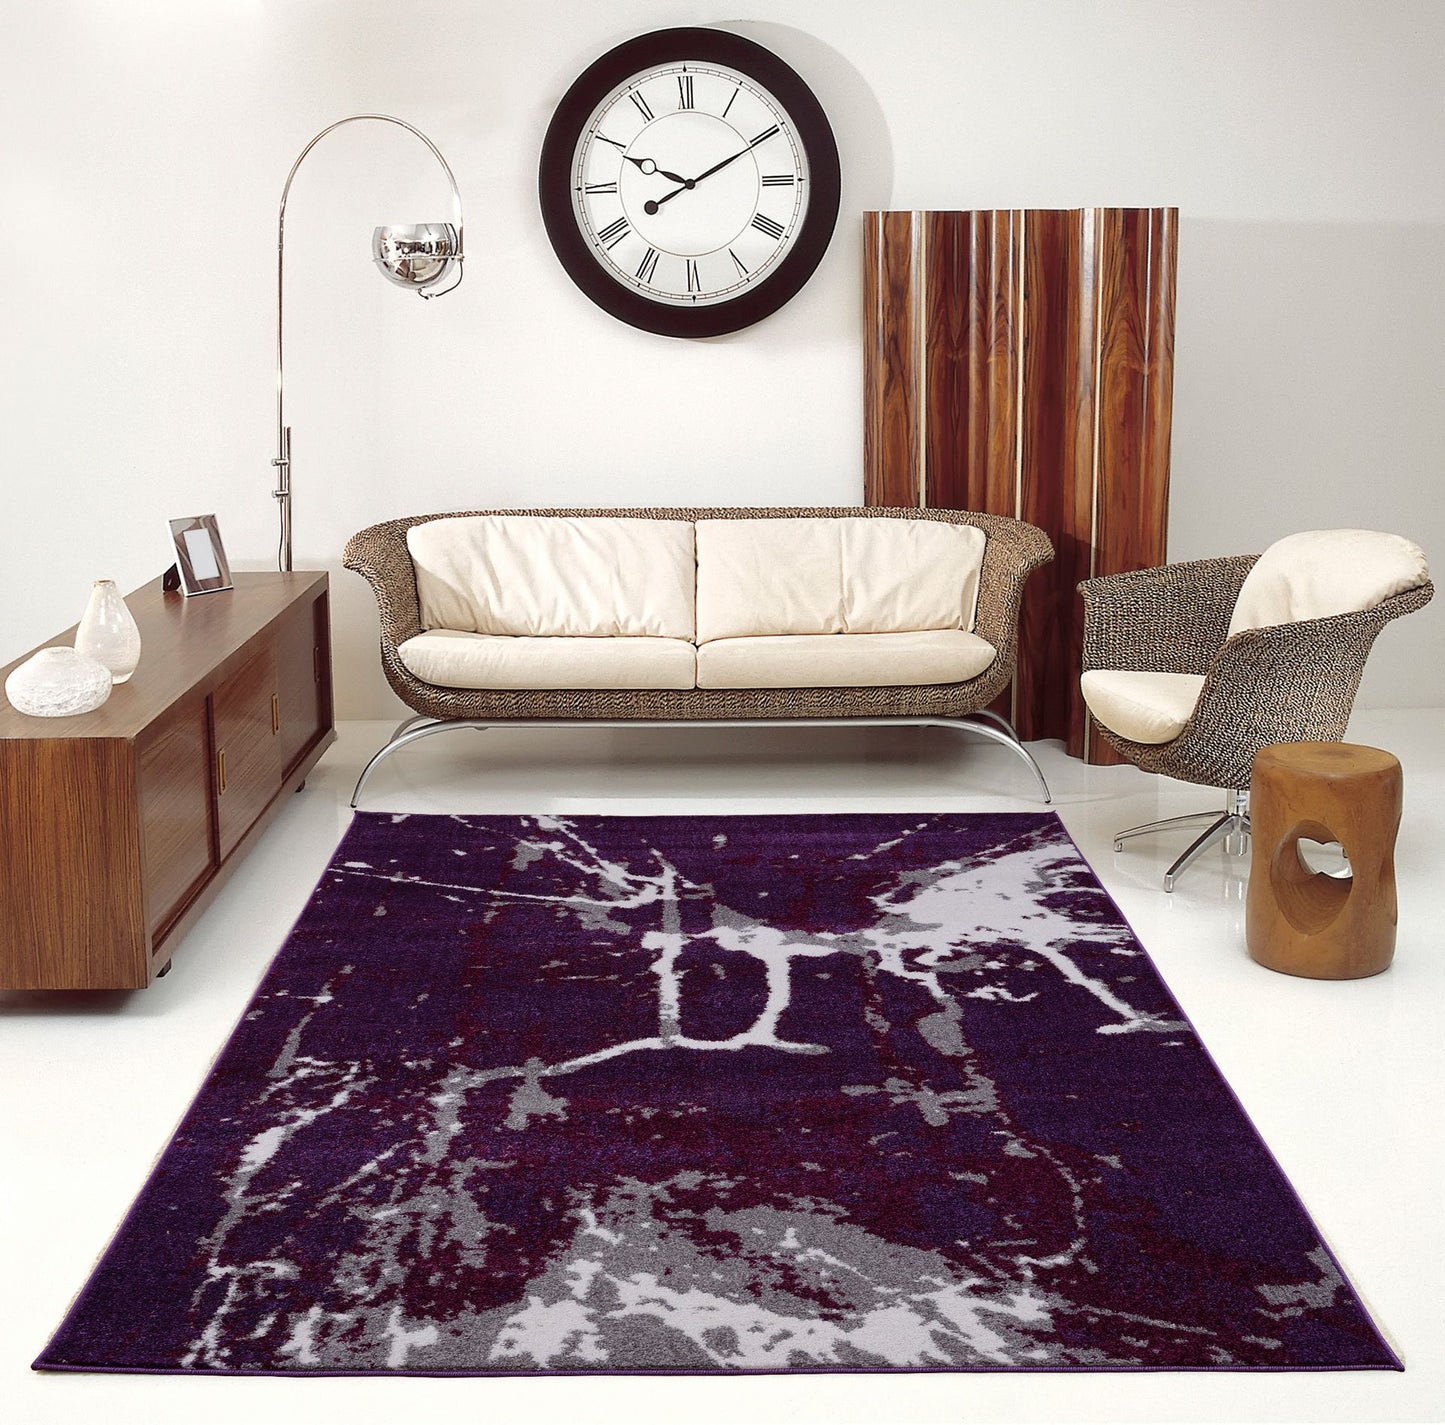 violet grey abstract area rug 2x5, 3x5 Runner Rug, Entry Way, Entrance, Balcony, Bedside, Home Office, Table Top